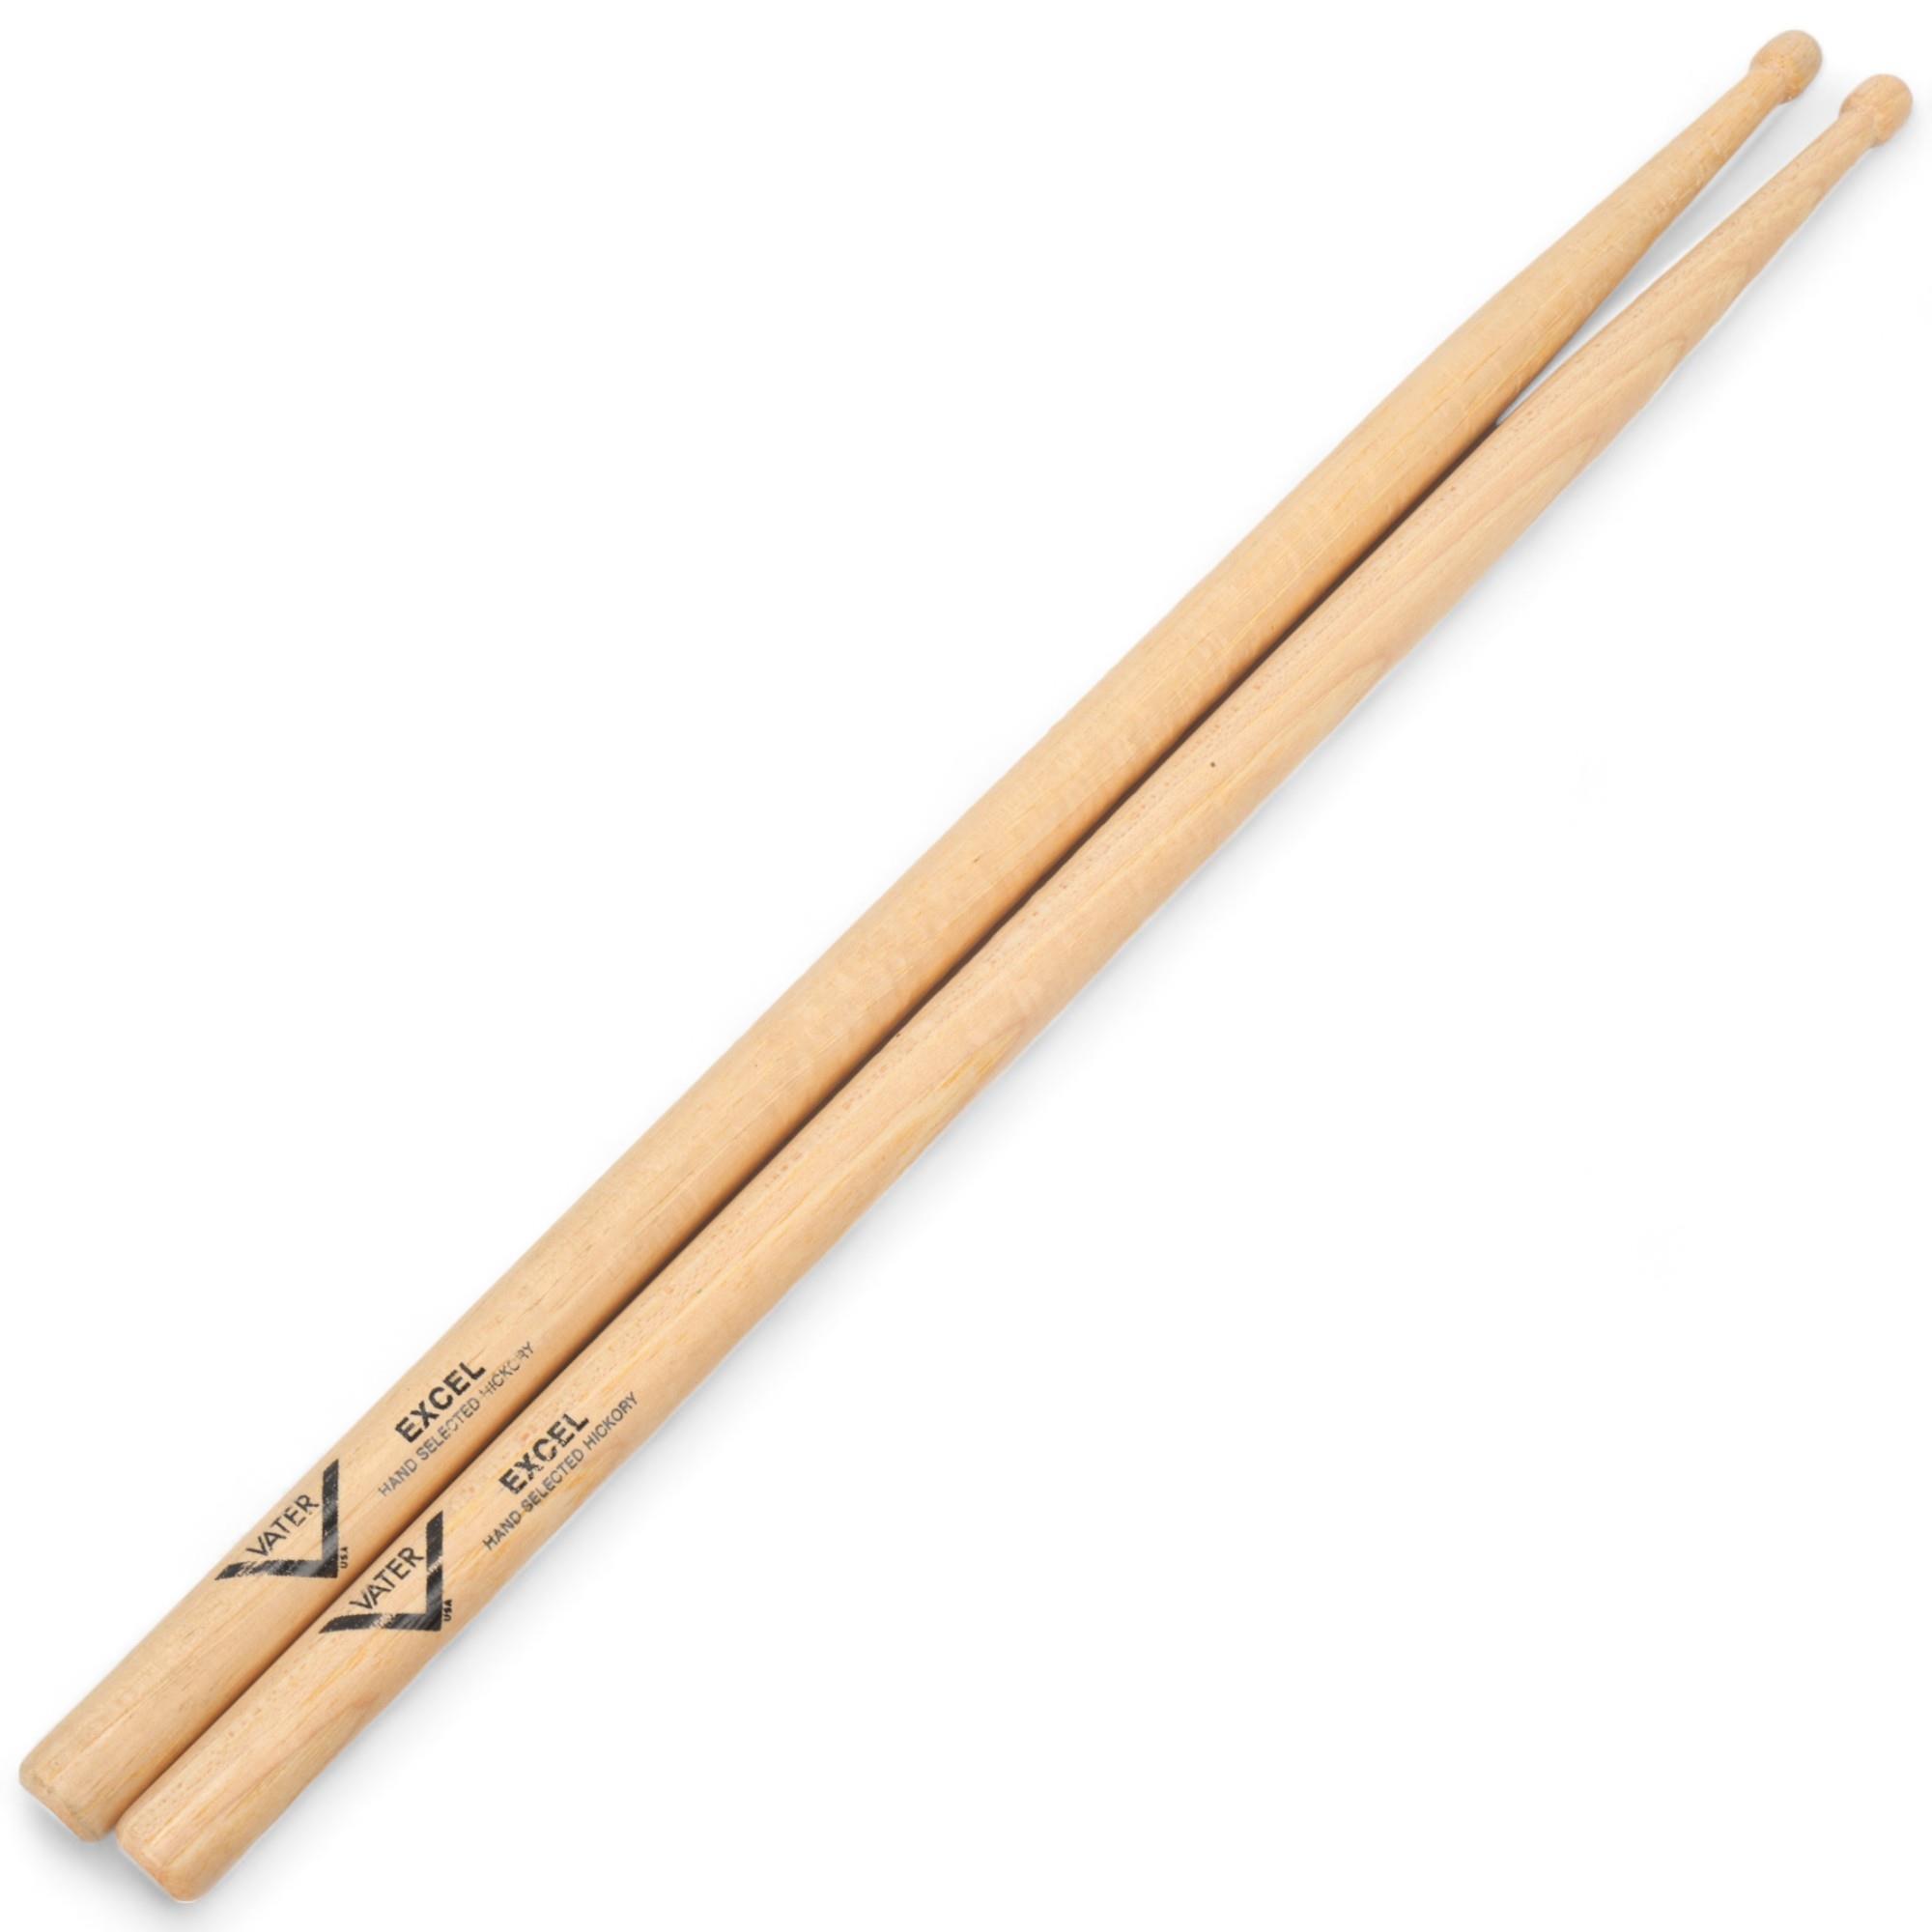 Two USED VATER 'EXCEL' Hickory DRUMSTICKS belonging to MITCH MITCHELL